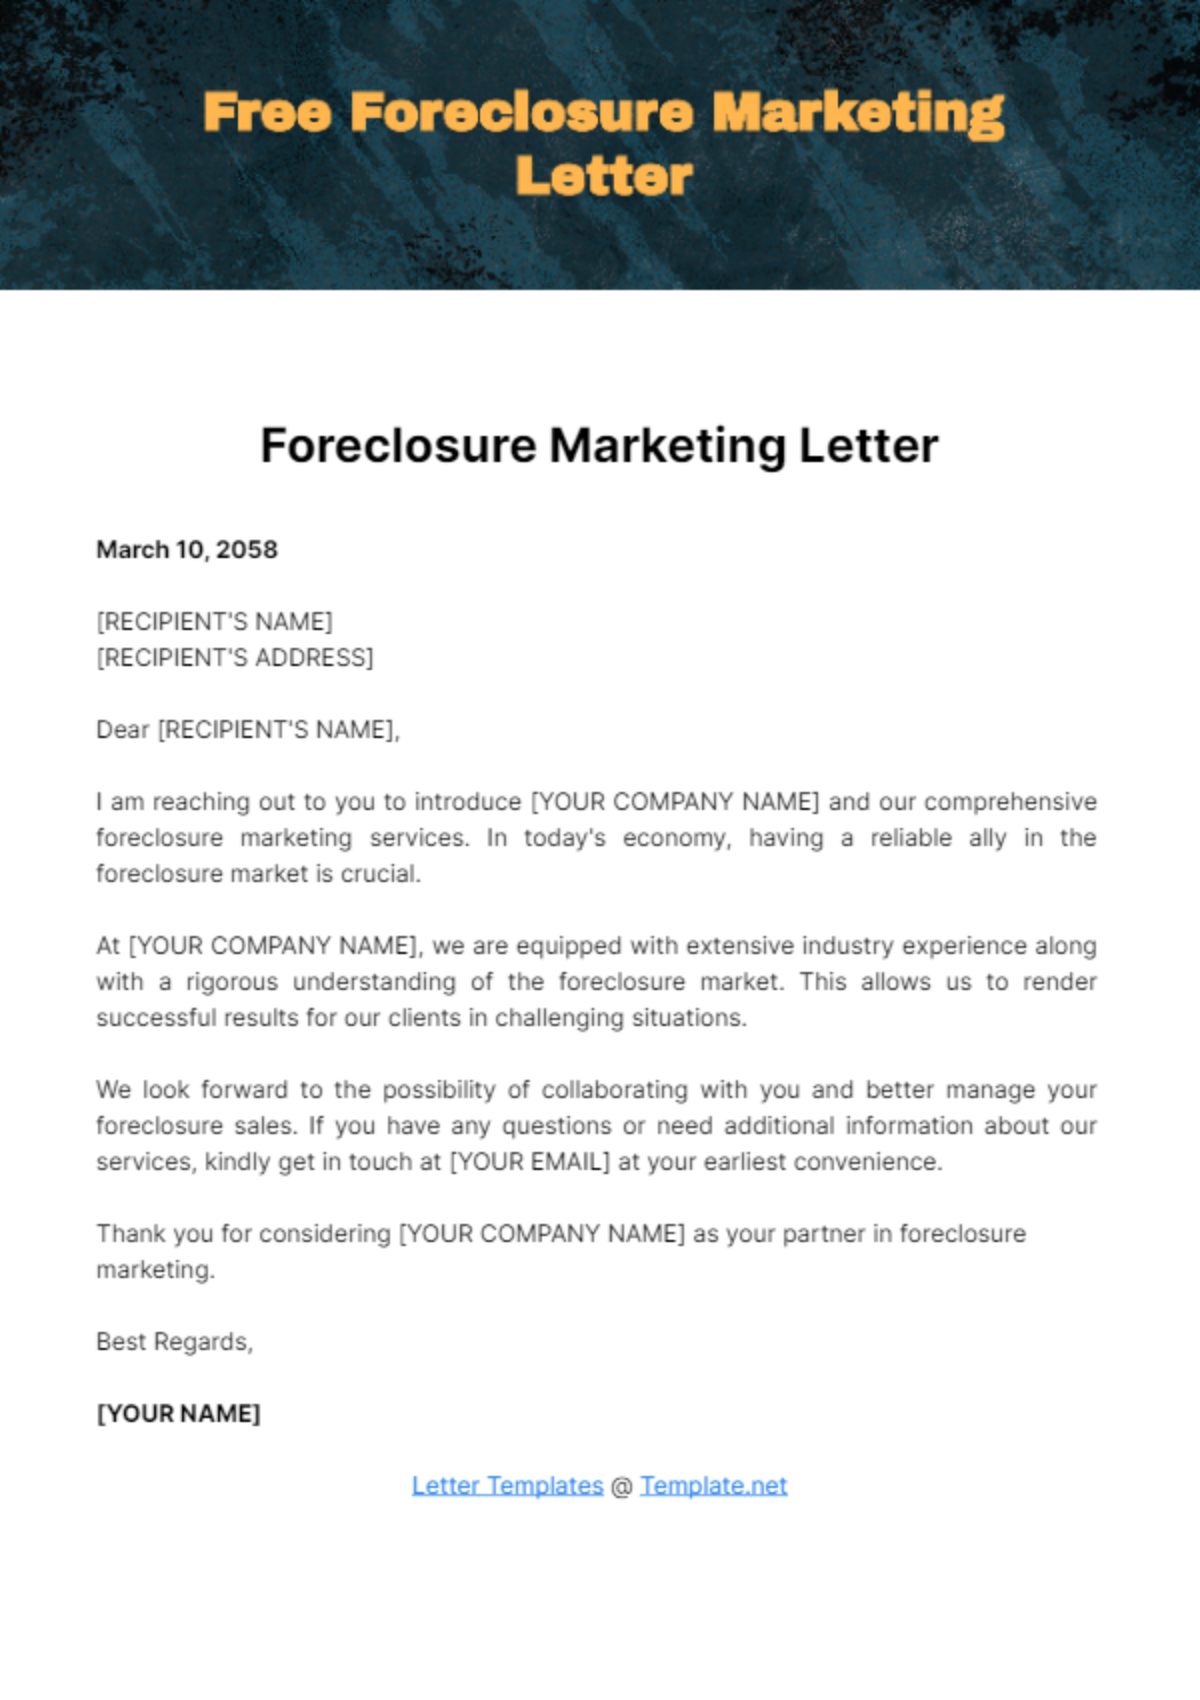 Foreclosure Marketing Letter Template